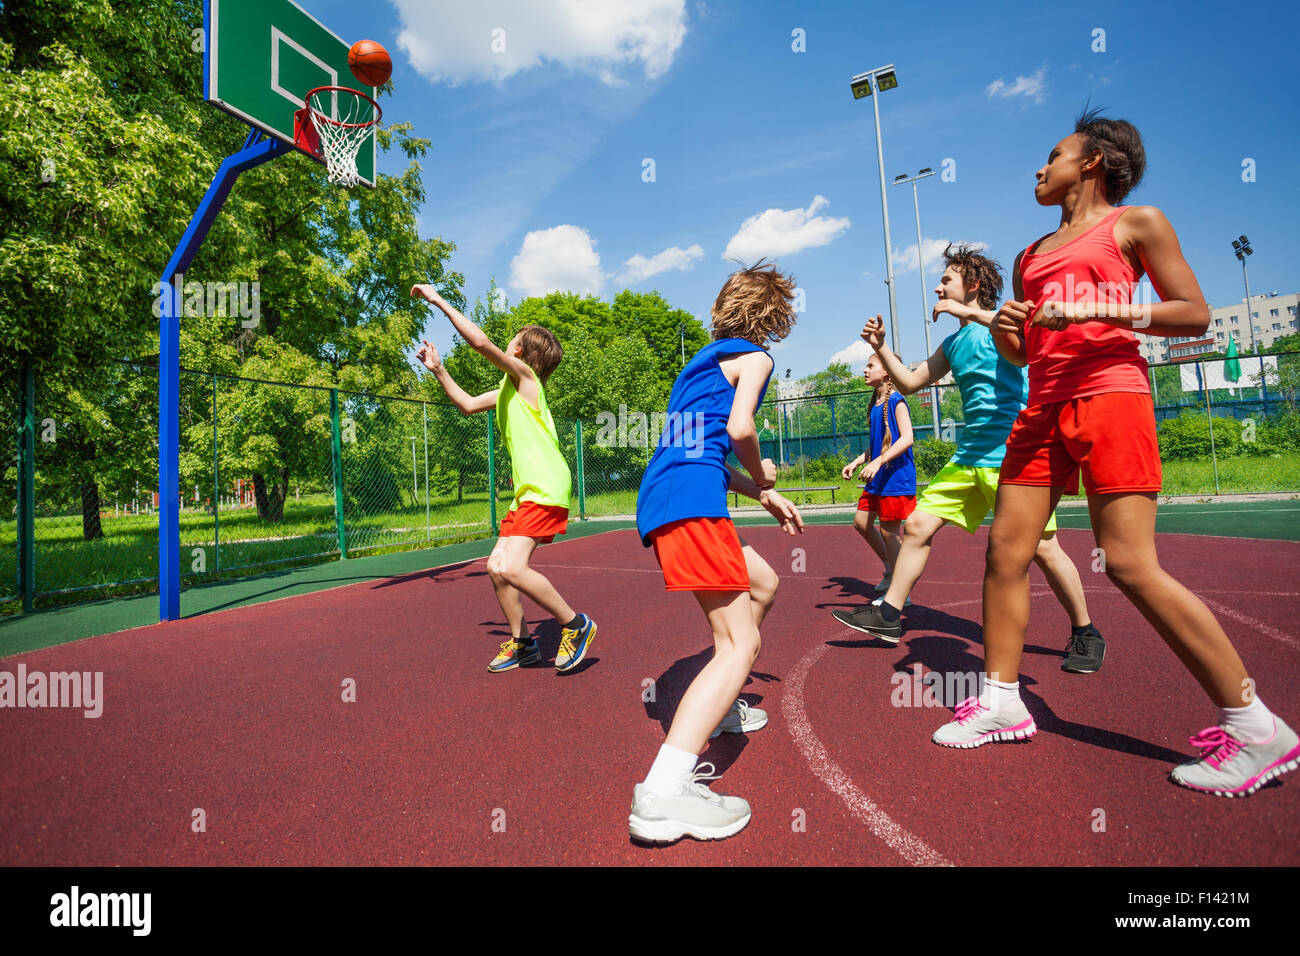 Teenagers in colorful uniforms playing basketball Stock Photo